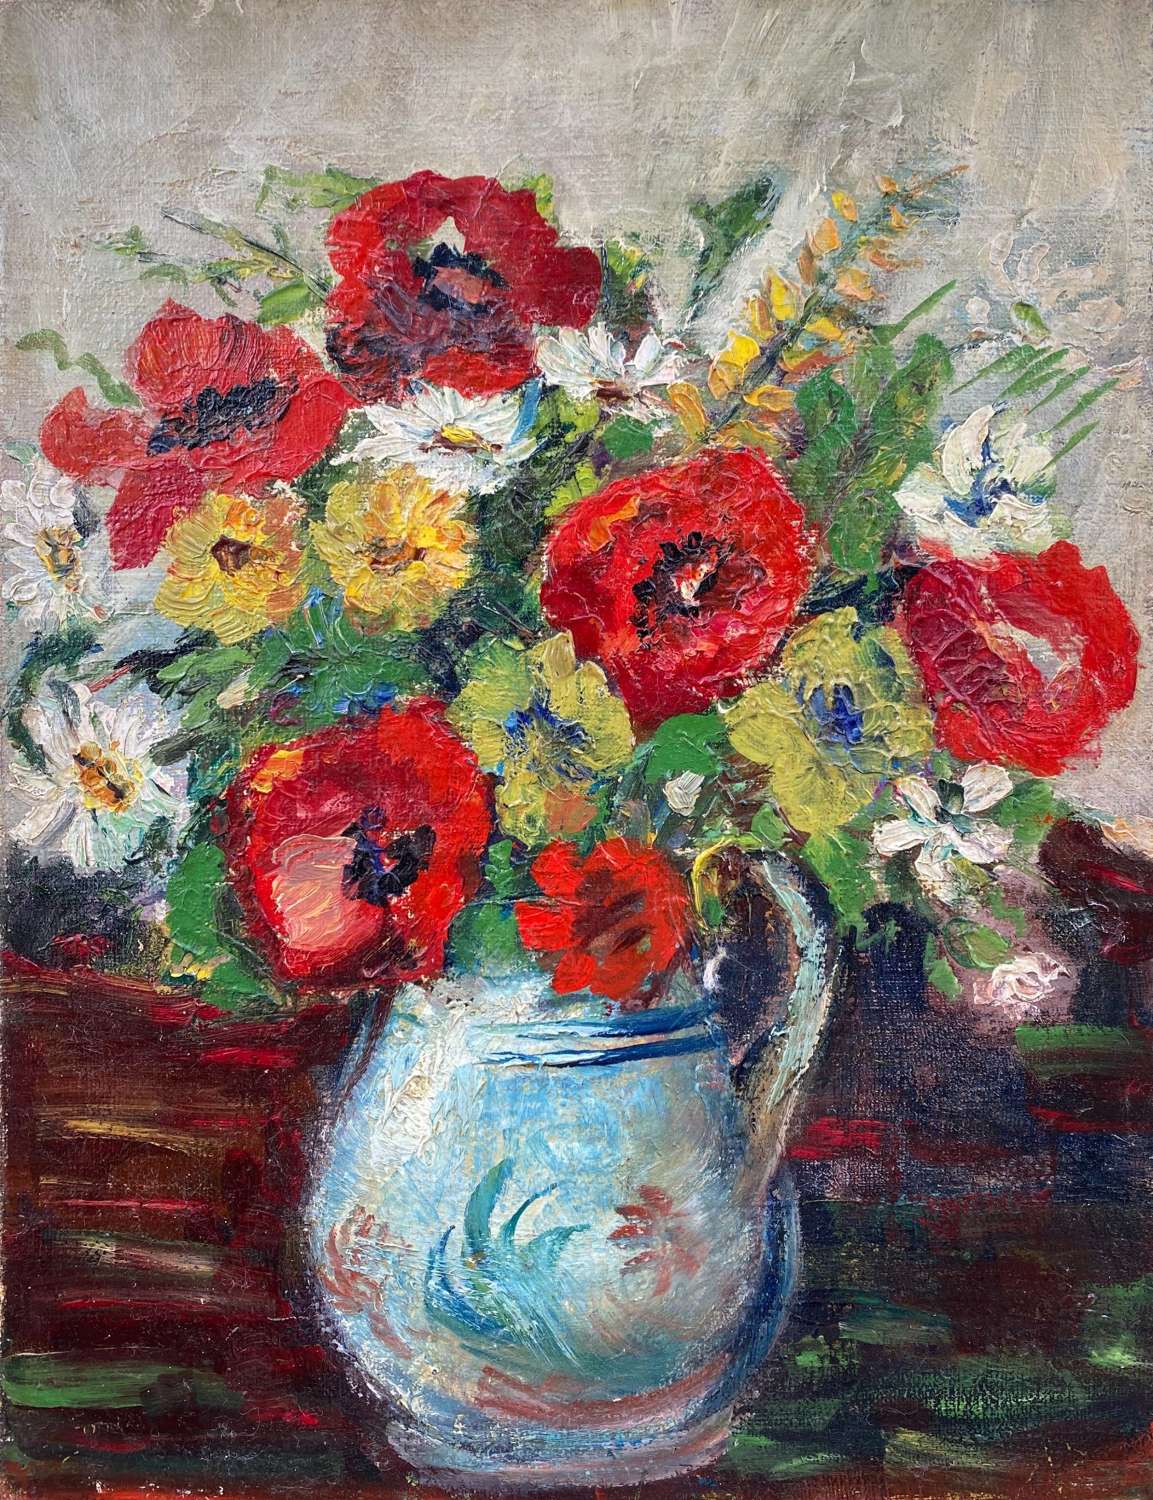 Red Poppies And Country Flowers: Art Deco Period Floral Still Life